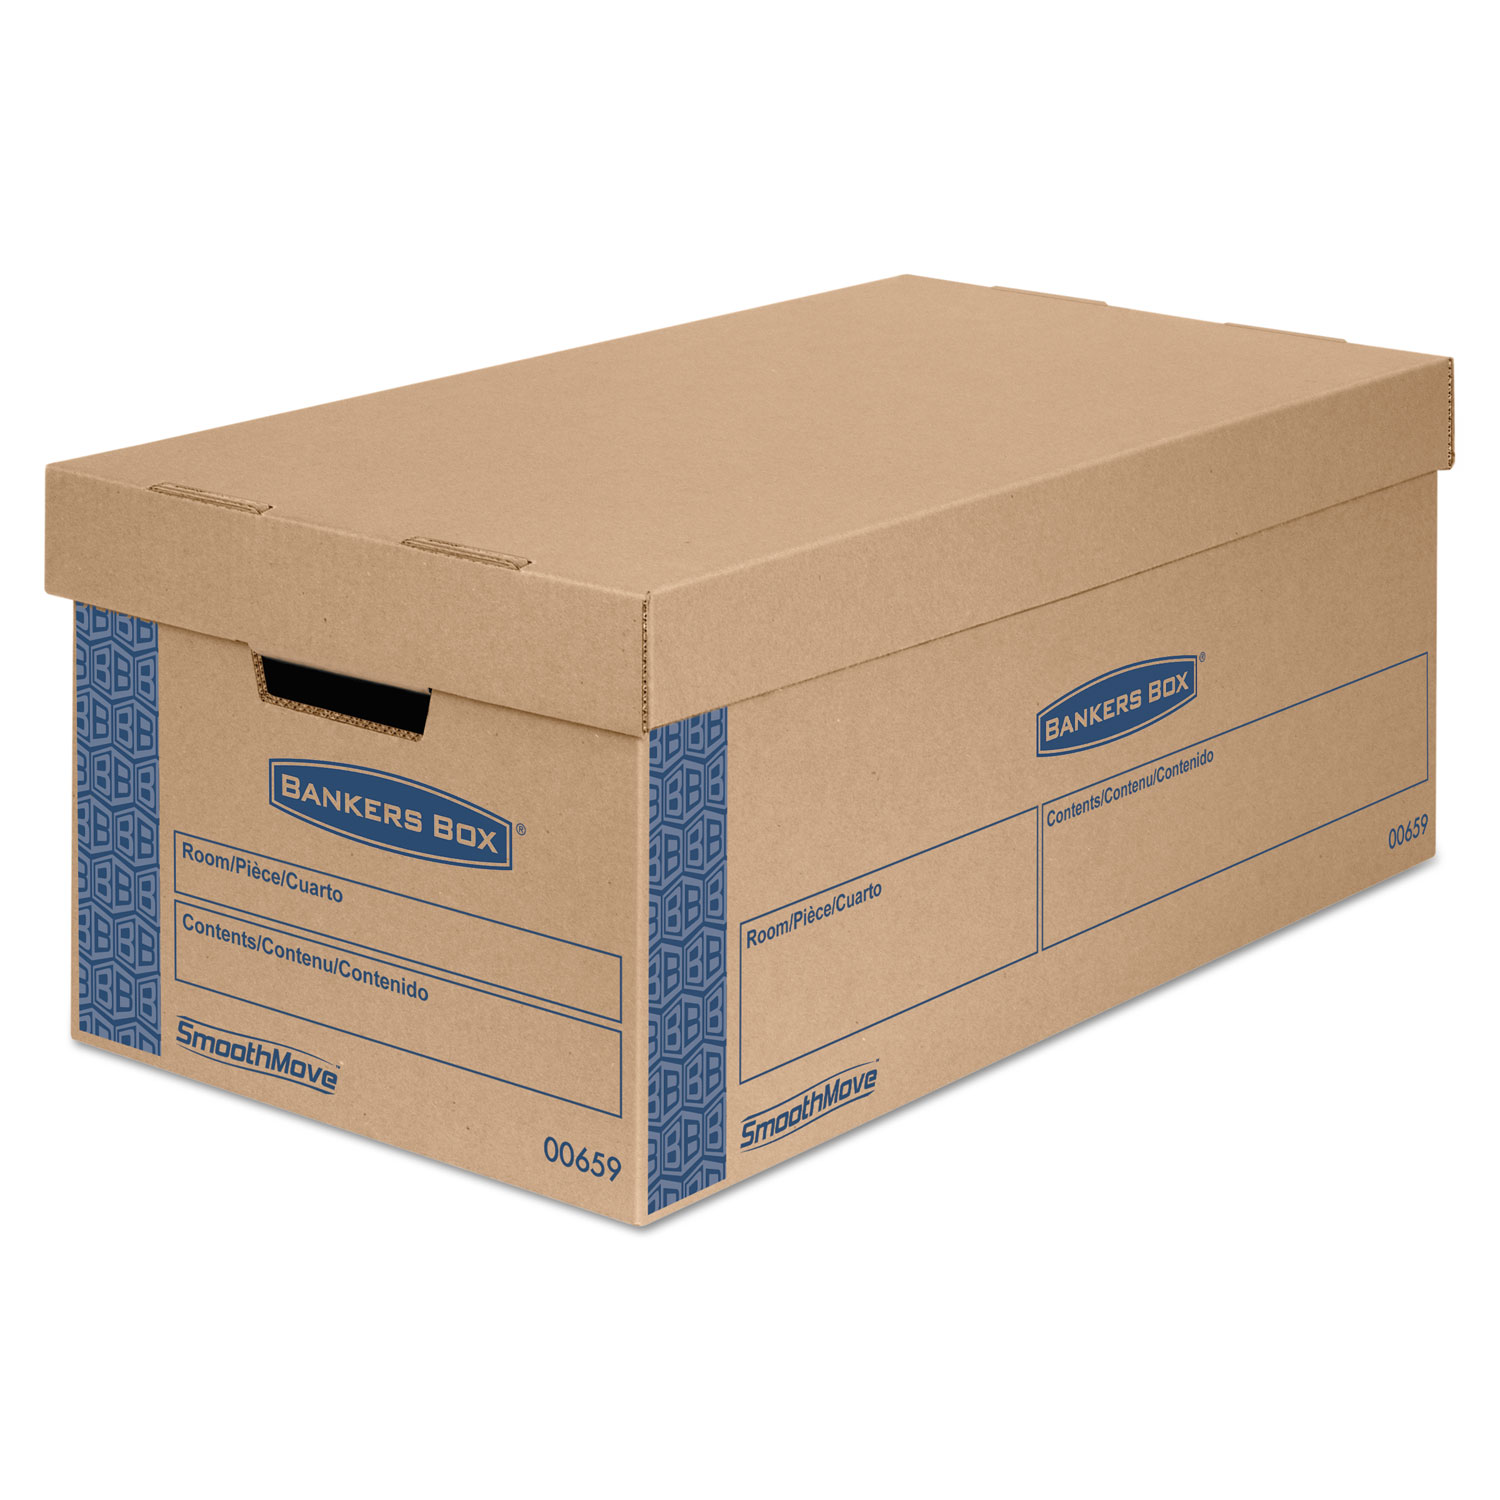  Bankers Box 0065901 SmoothMove Prime Moving & Storage Boxes, Small, Half Slotted Container (HSC), 24 x 12 x 10, Brown Kraft/Blue, 8/Carton (FEL0065901) 